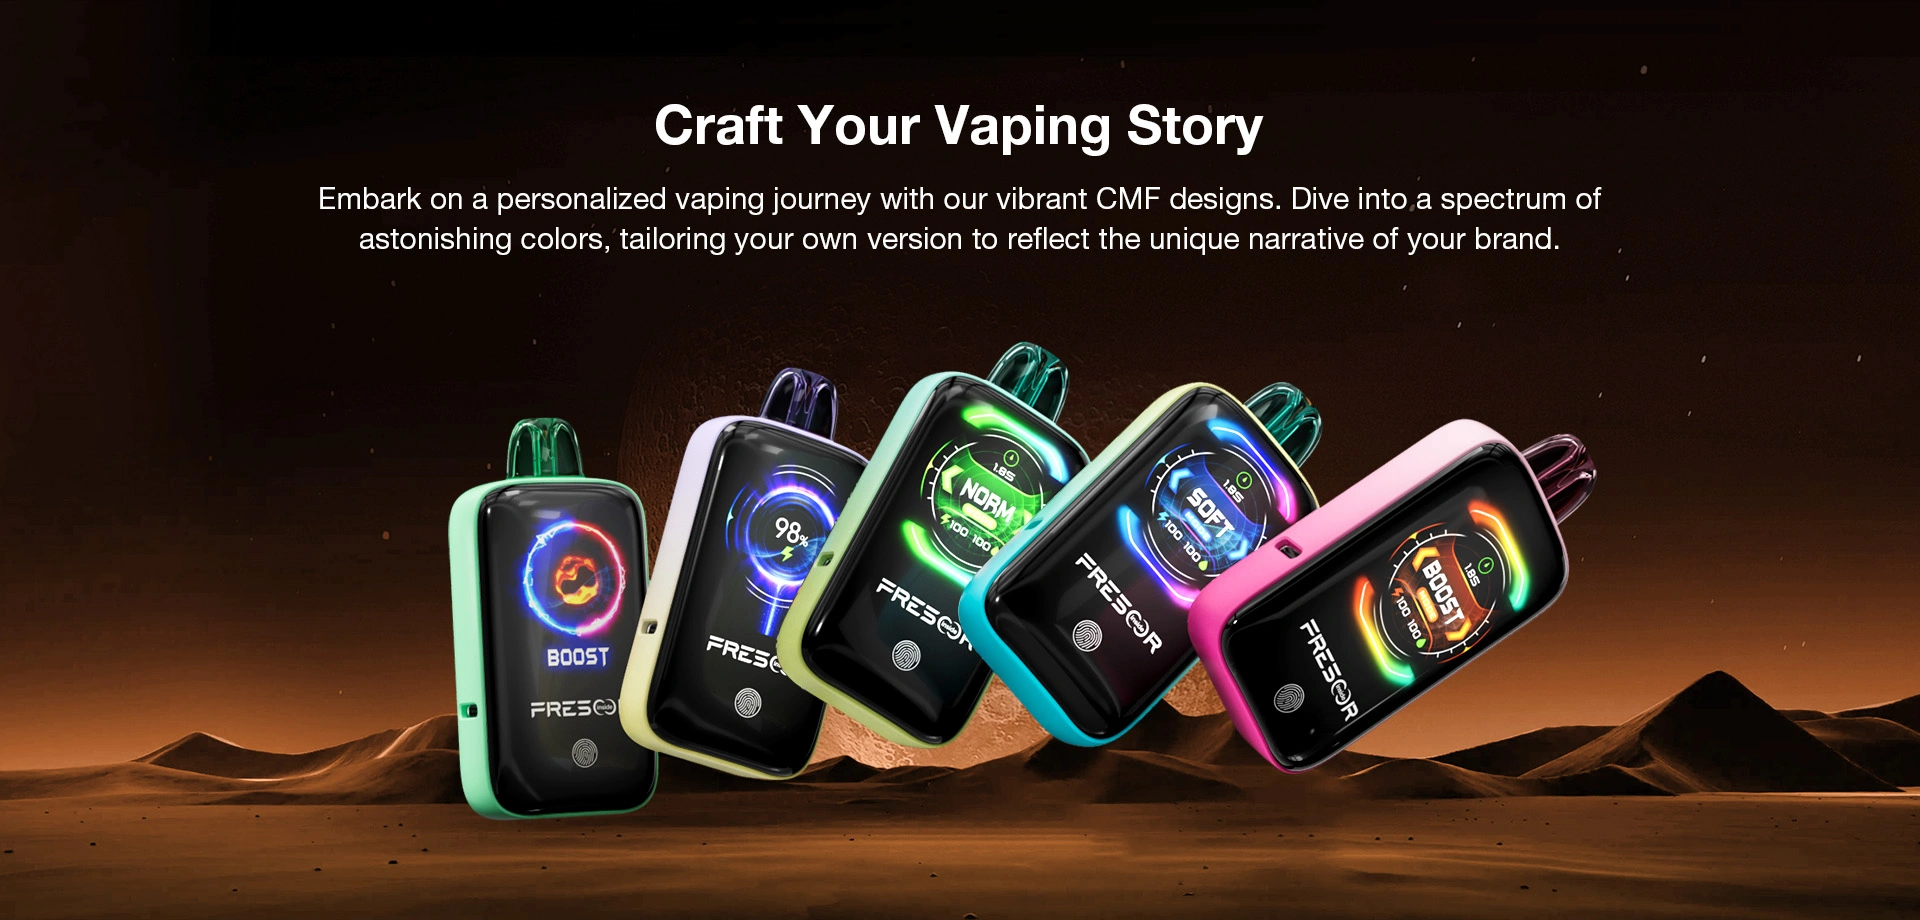 Craft Your Vaping Story  Embark on a personalized vaping journey with our vibrant CMF designs. Dive into a spectrum of astonishing colors, tailoring your own version to reflect the unique narrative of your brand.